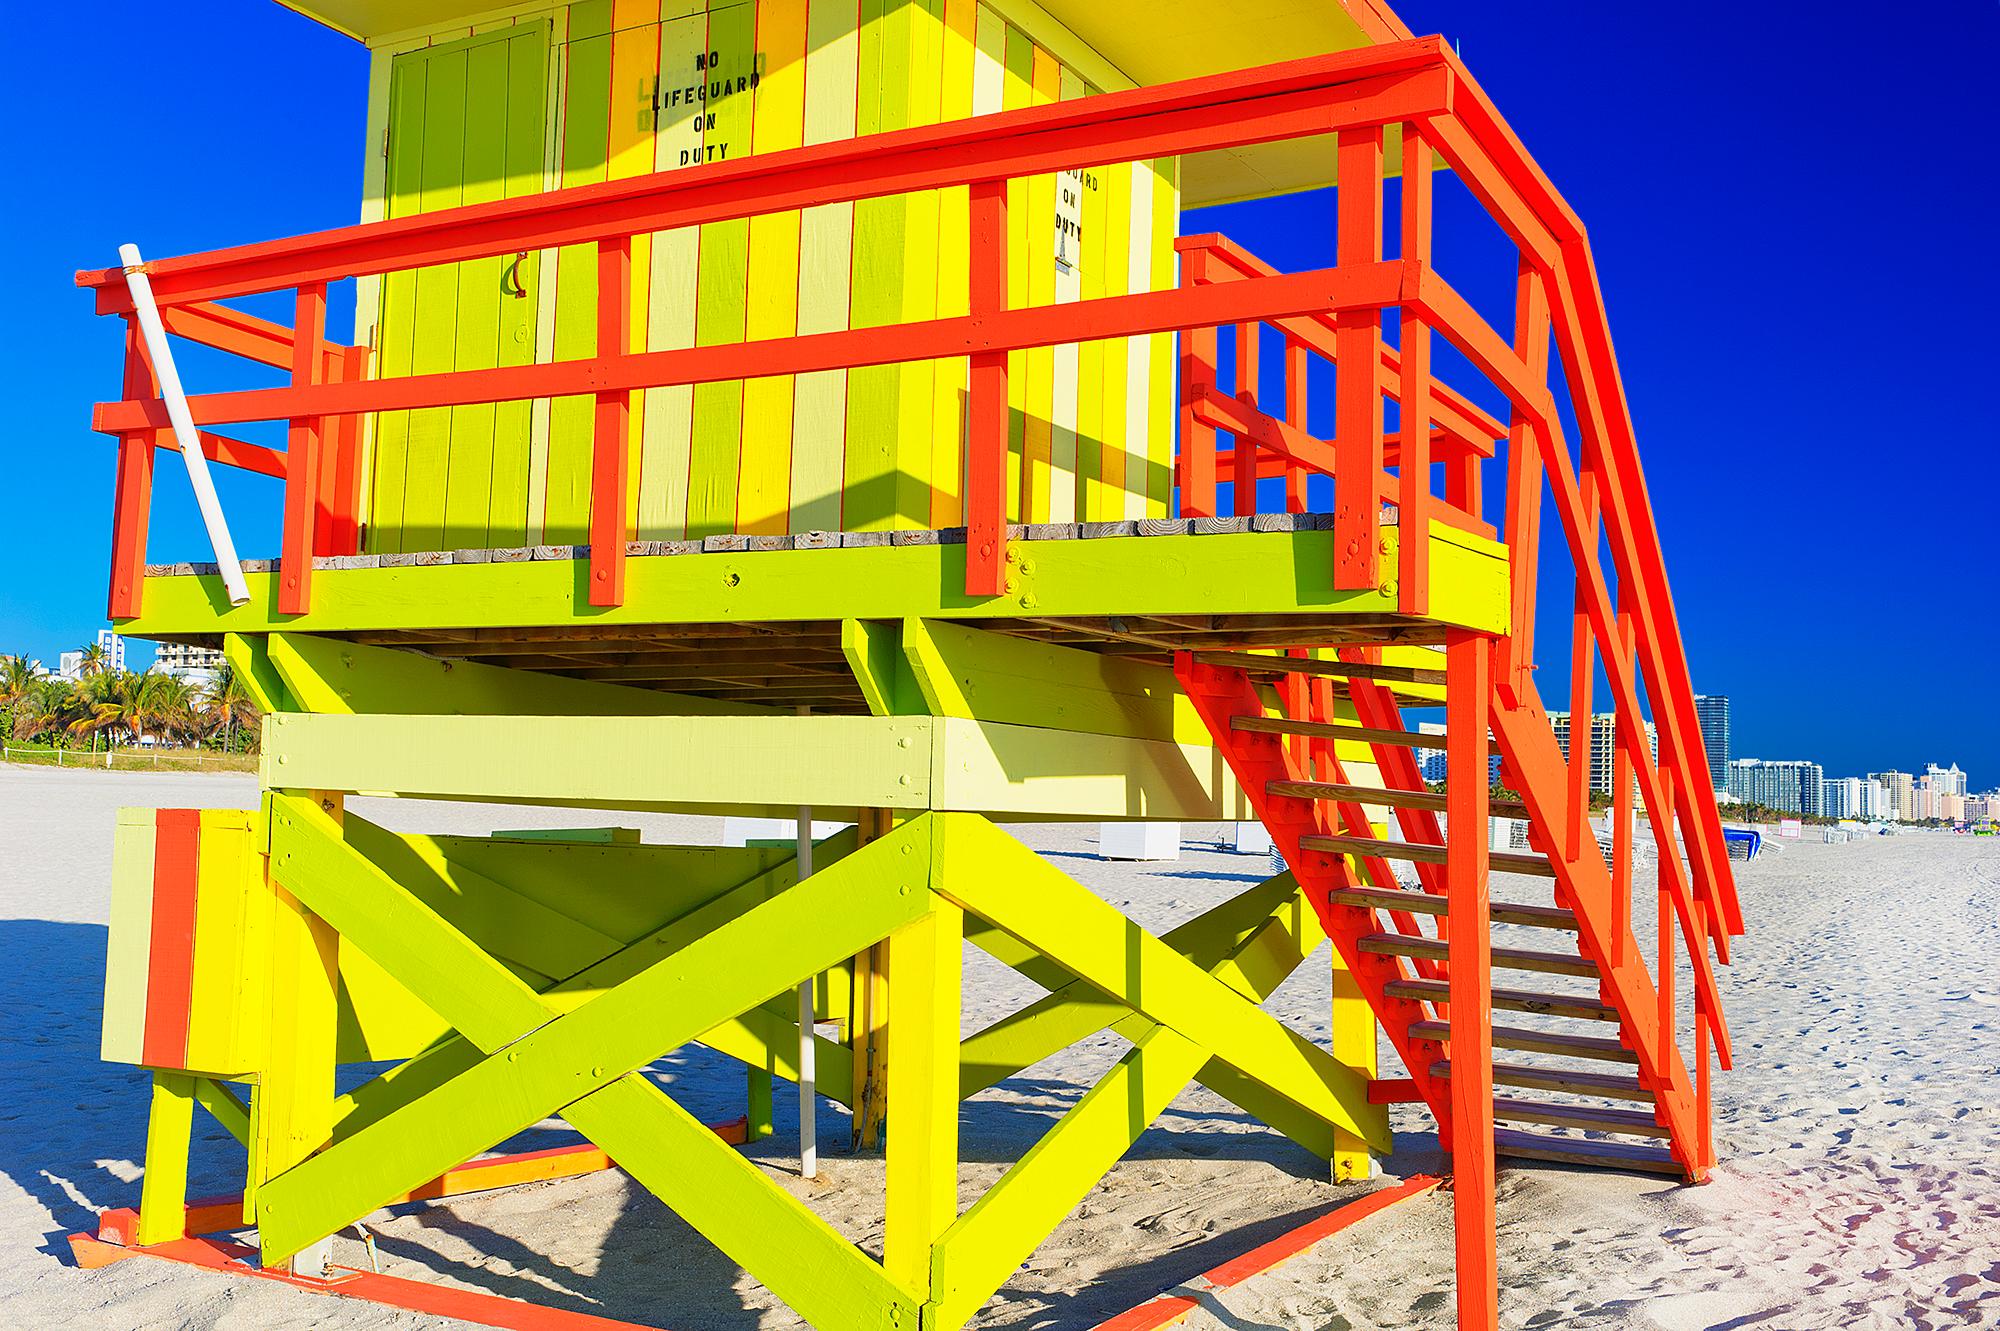 Mitchell Funk Abstract Photograph – South Beach Life Guard Station in Rot, Gelb und Blau